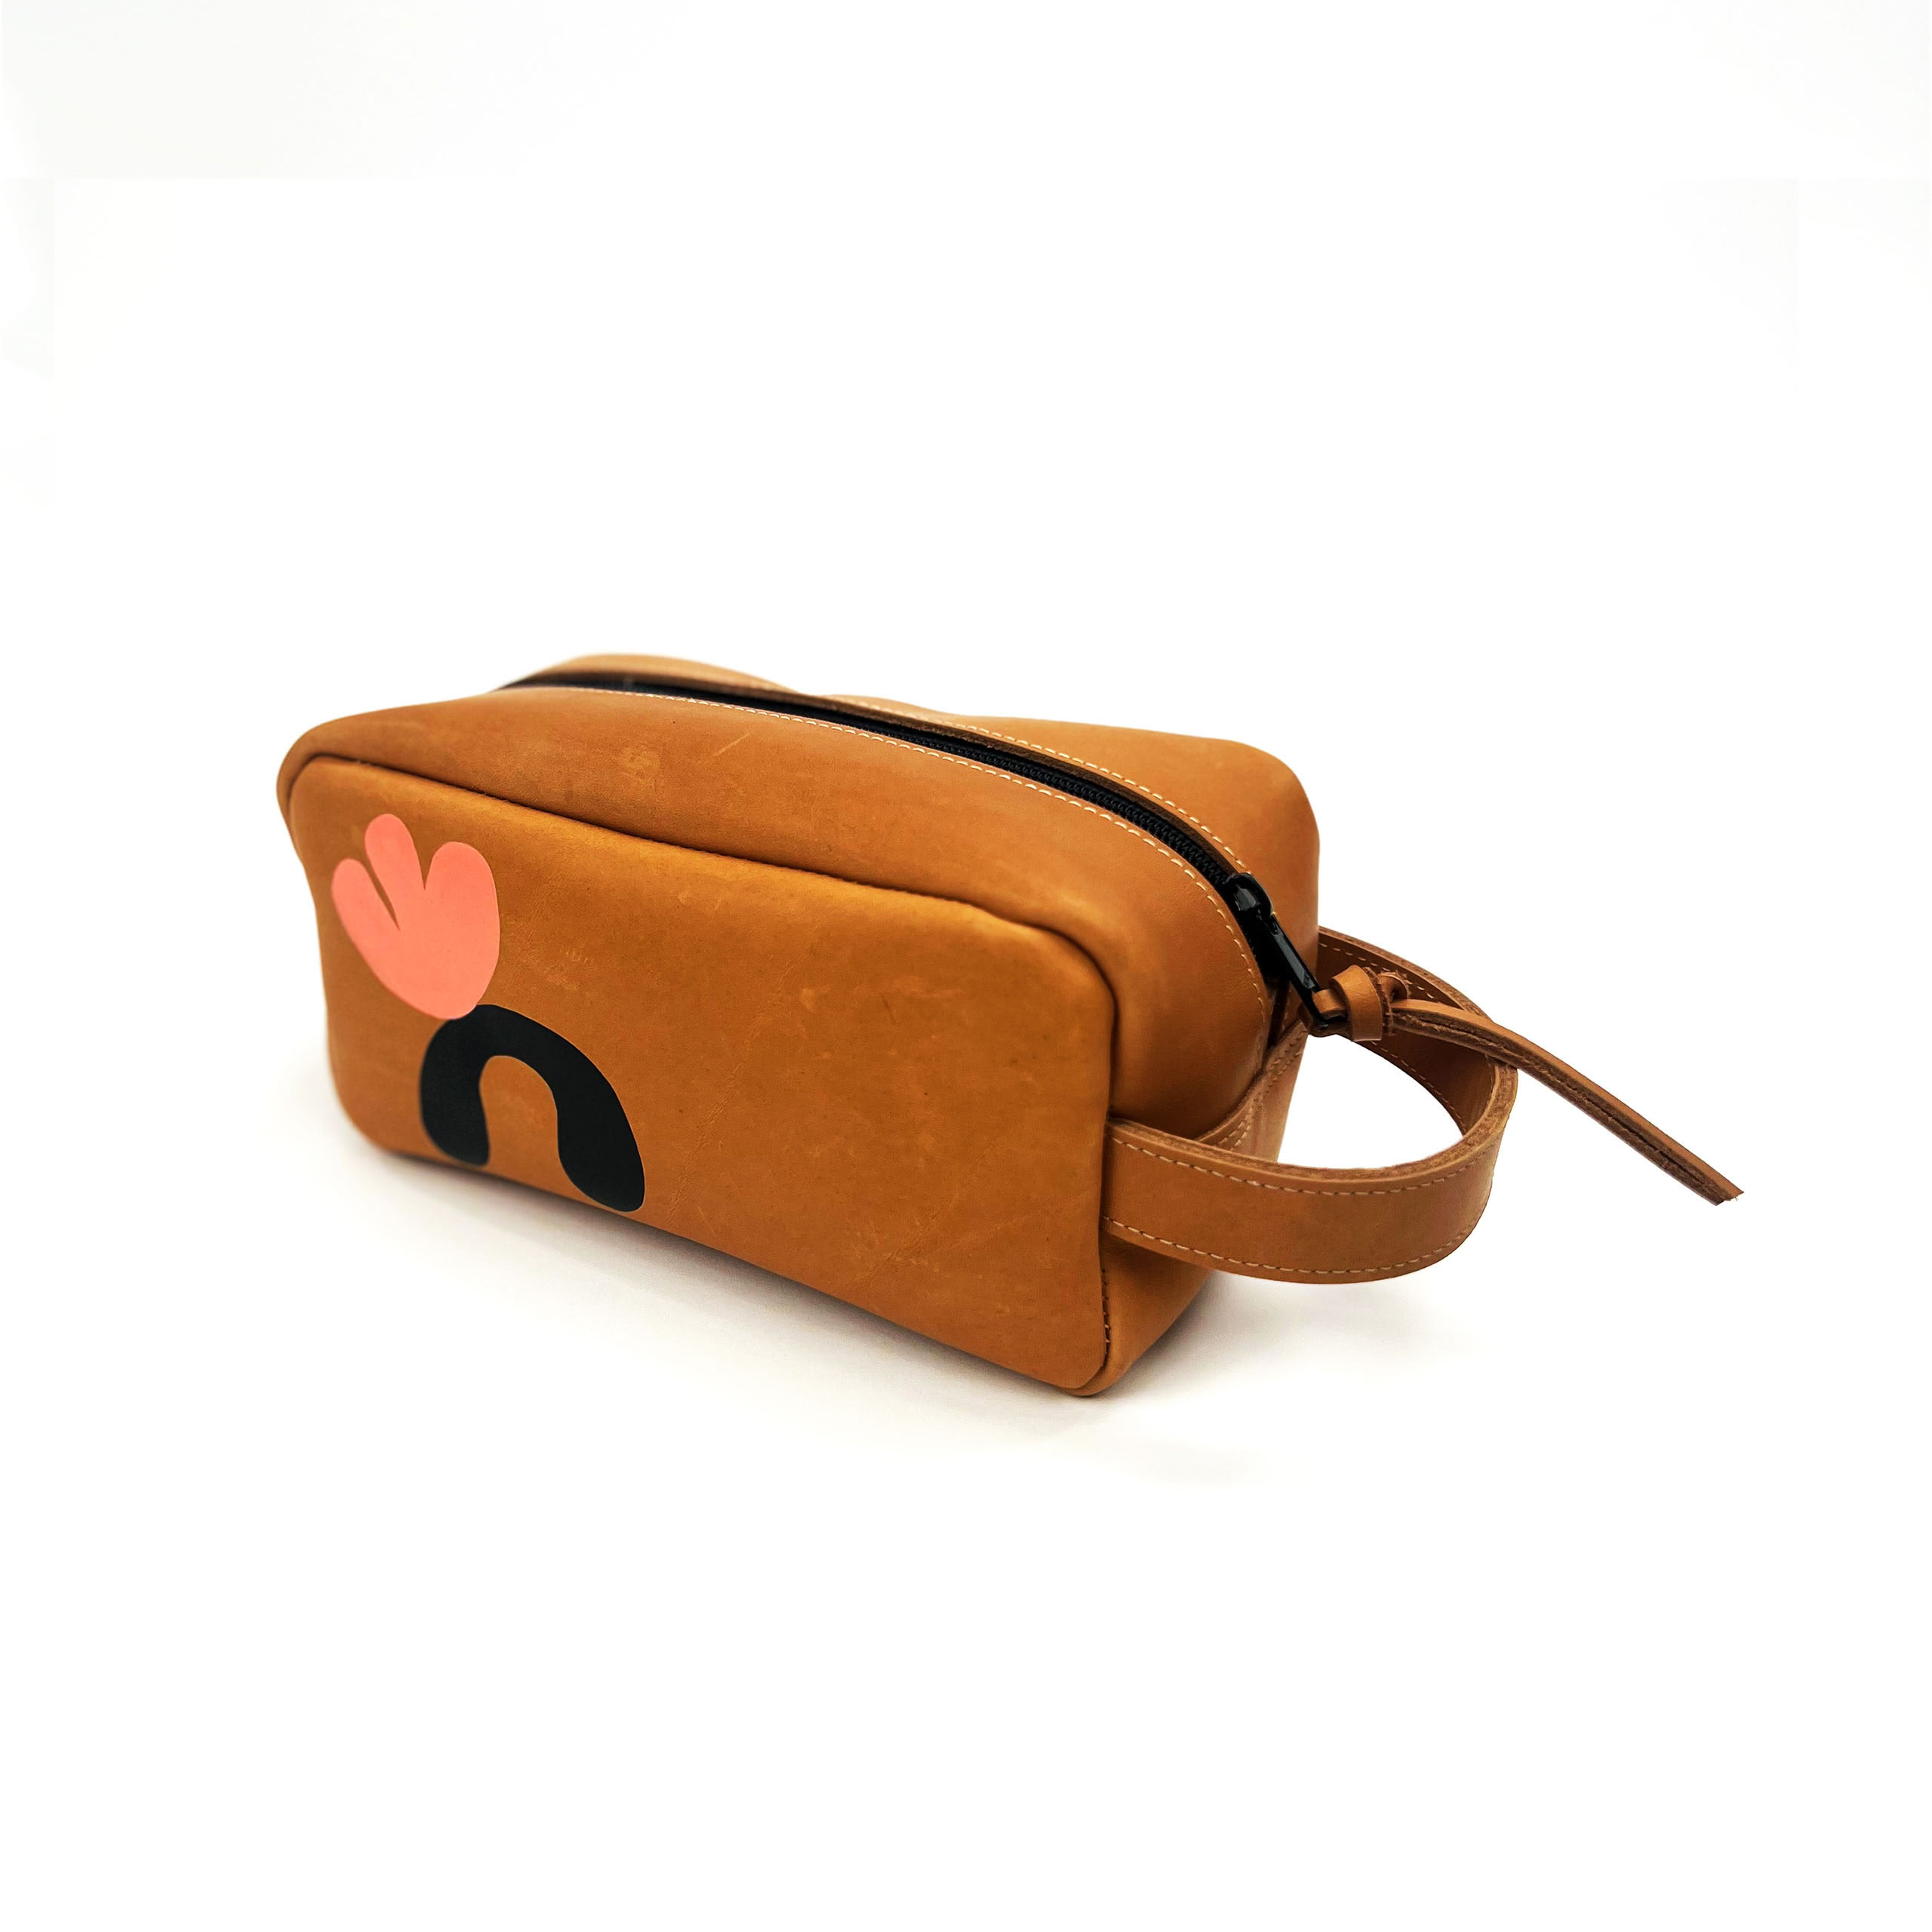 Brown and tan cosmetic bag with a peach handprint logo and text on the side, positioned against a white background.